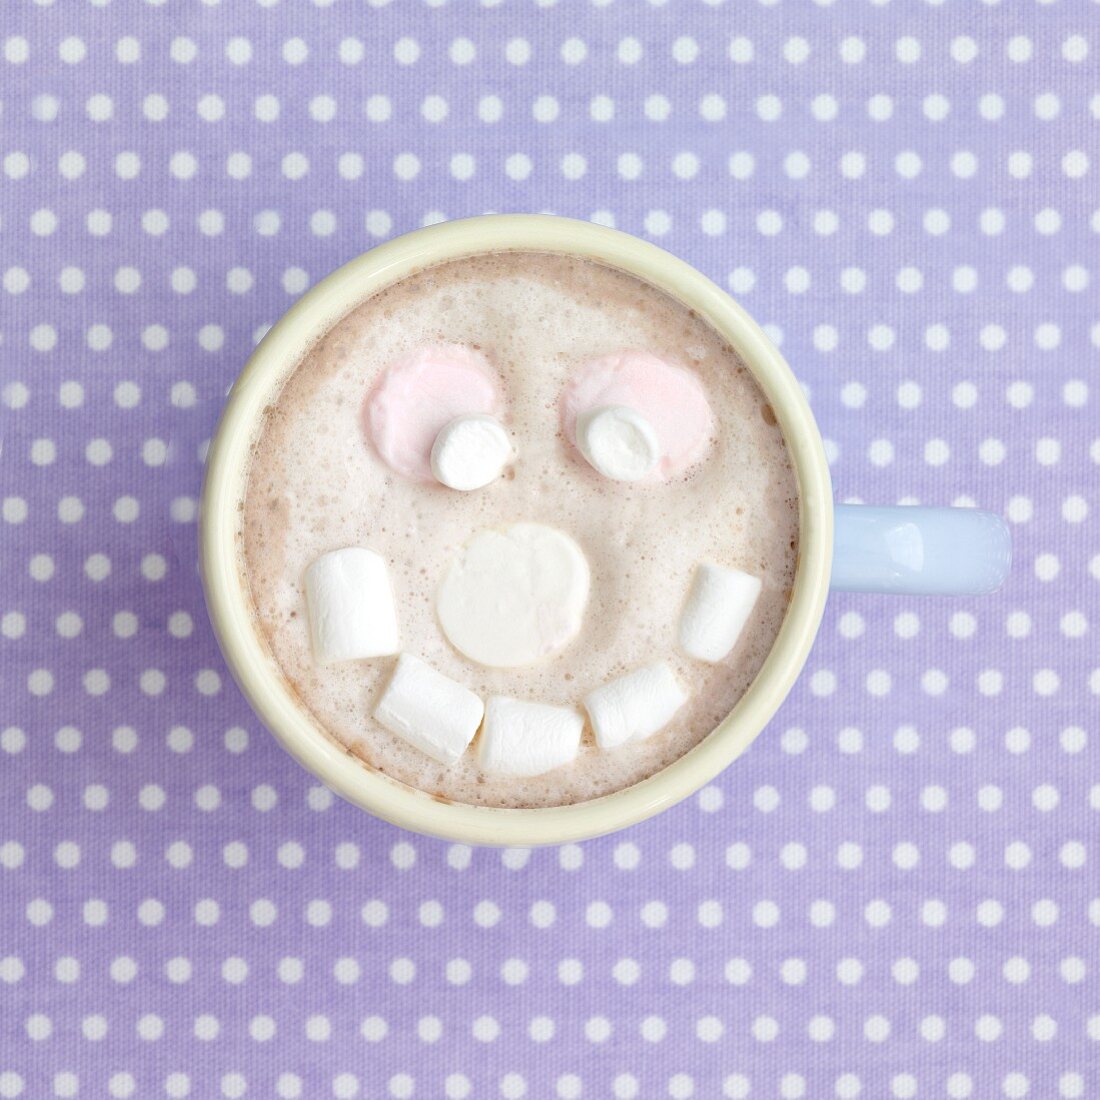 A cup of cocoa with a marshmallow face